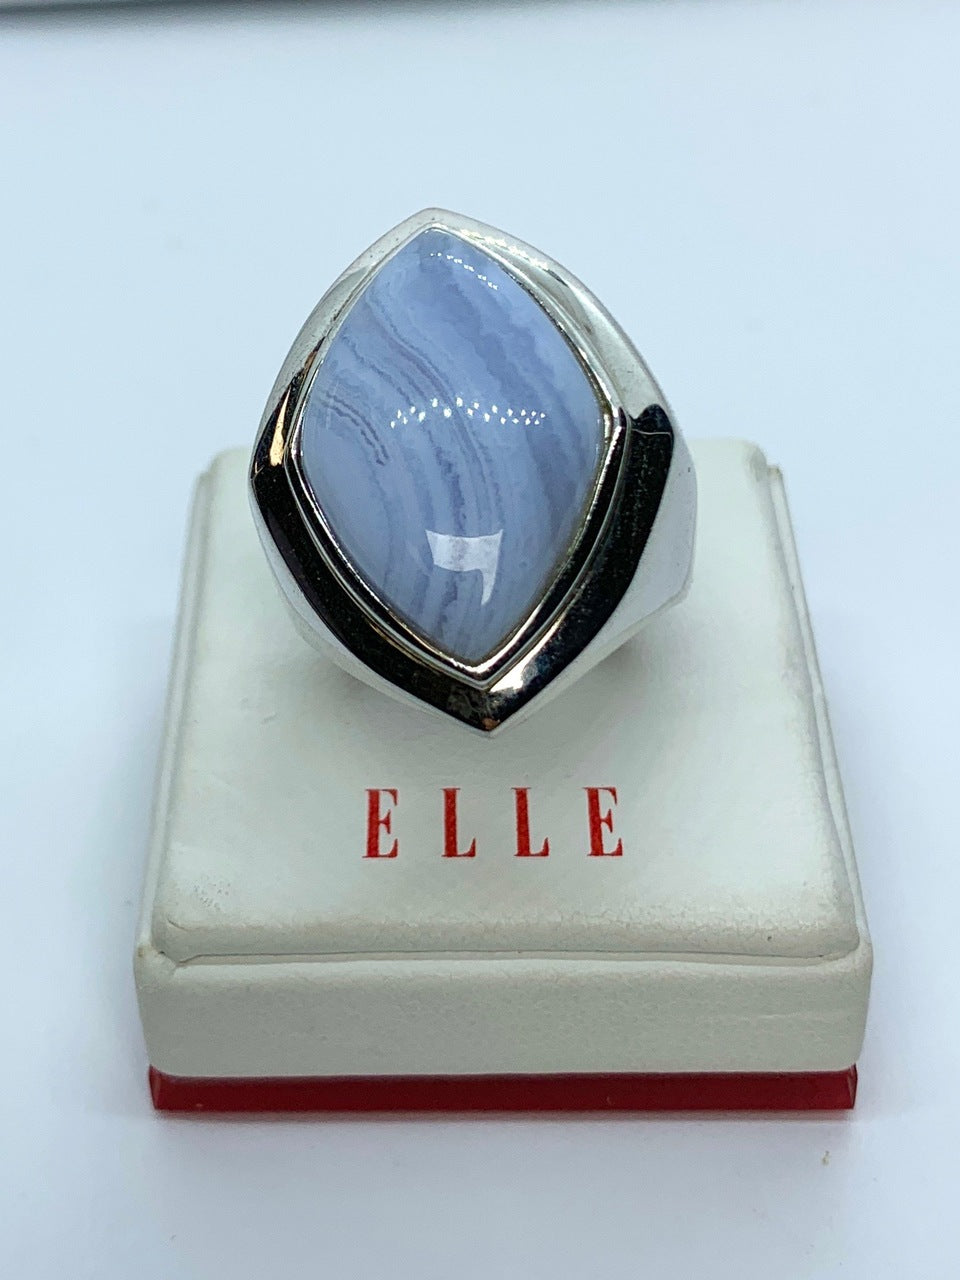 Elle Lace Agate Ring